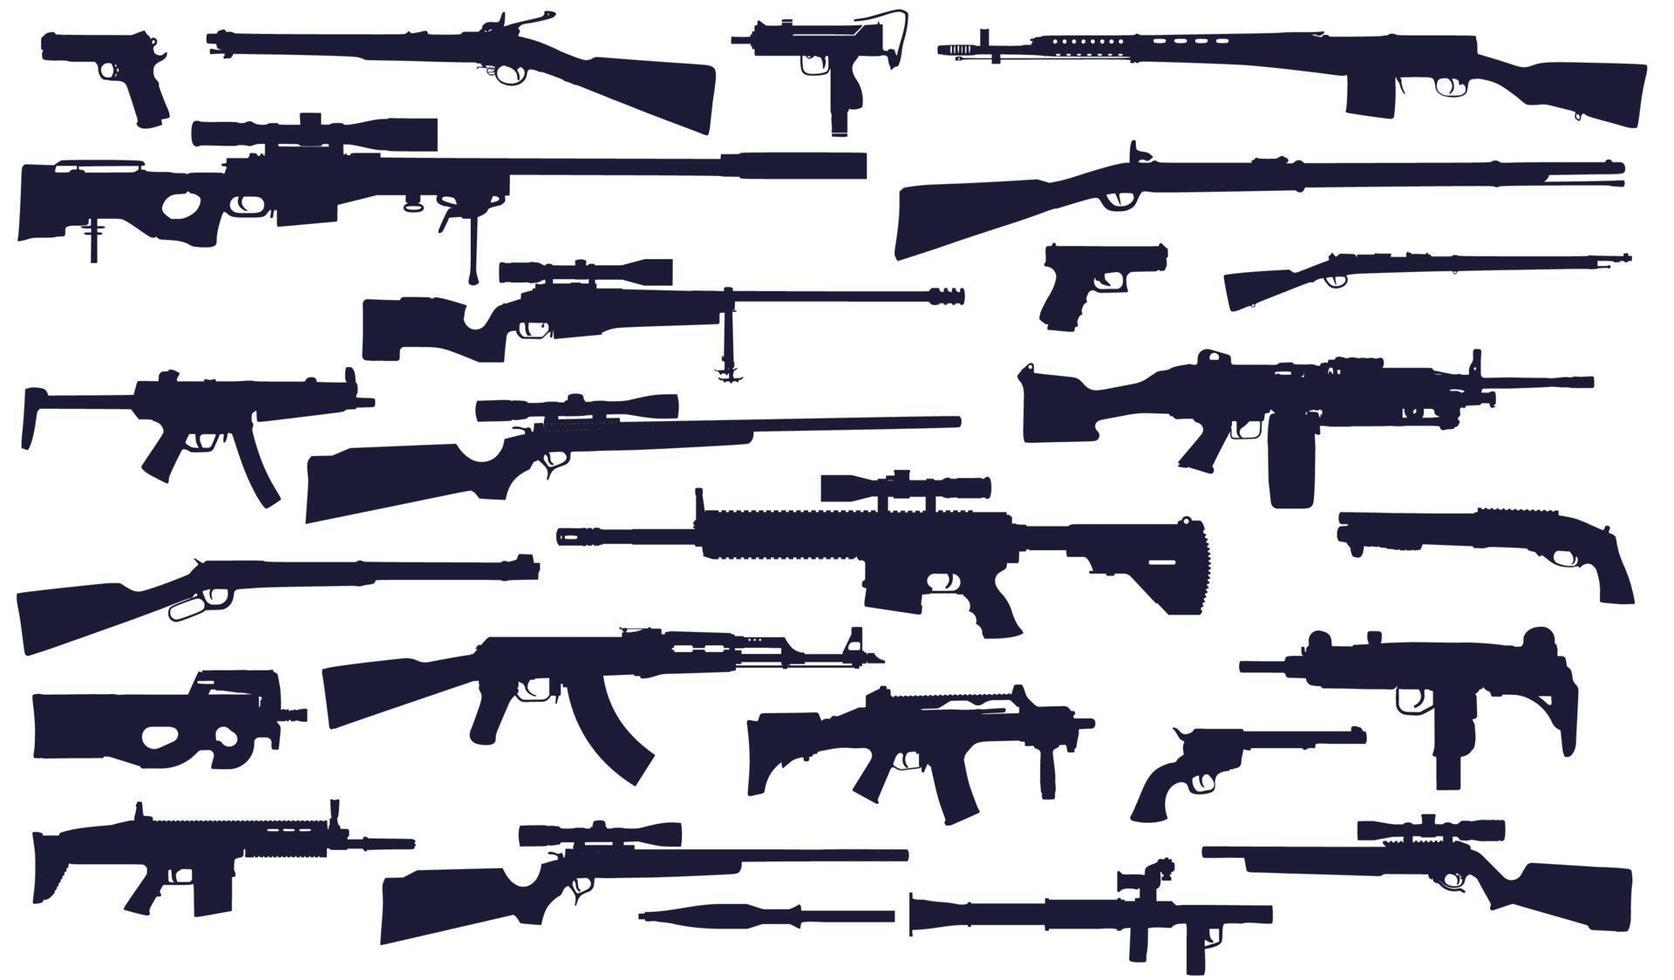 Big set of silhouettes of 24 firearms. Pistols, rifles, shotguns, small-caliber weapons and even a grenade launcher in one place. vector